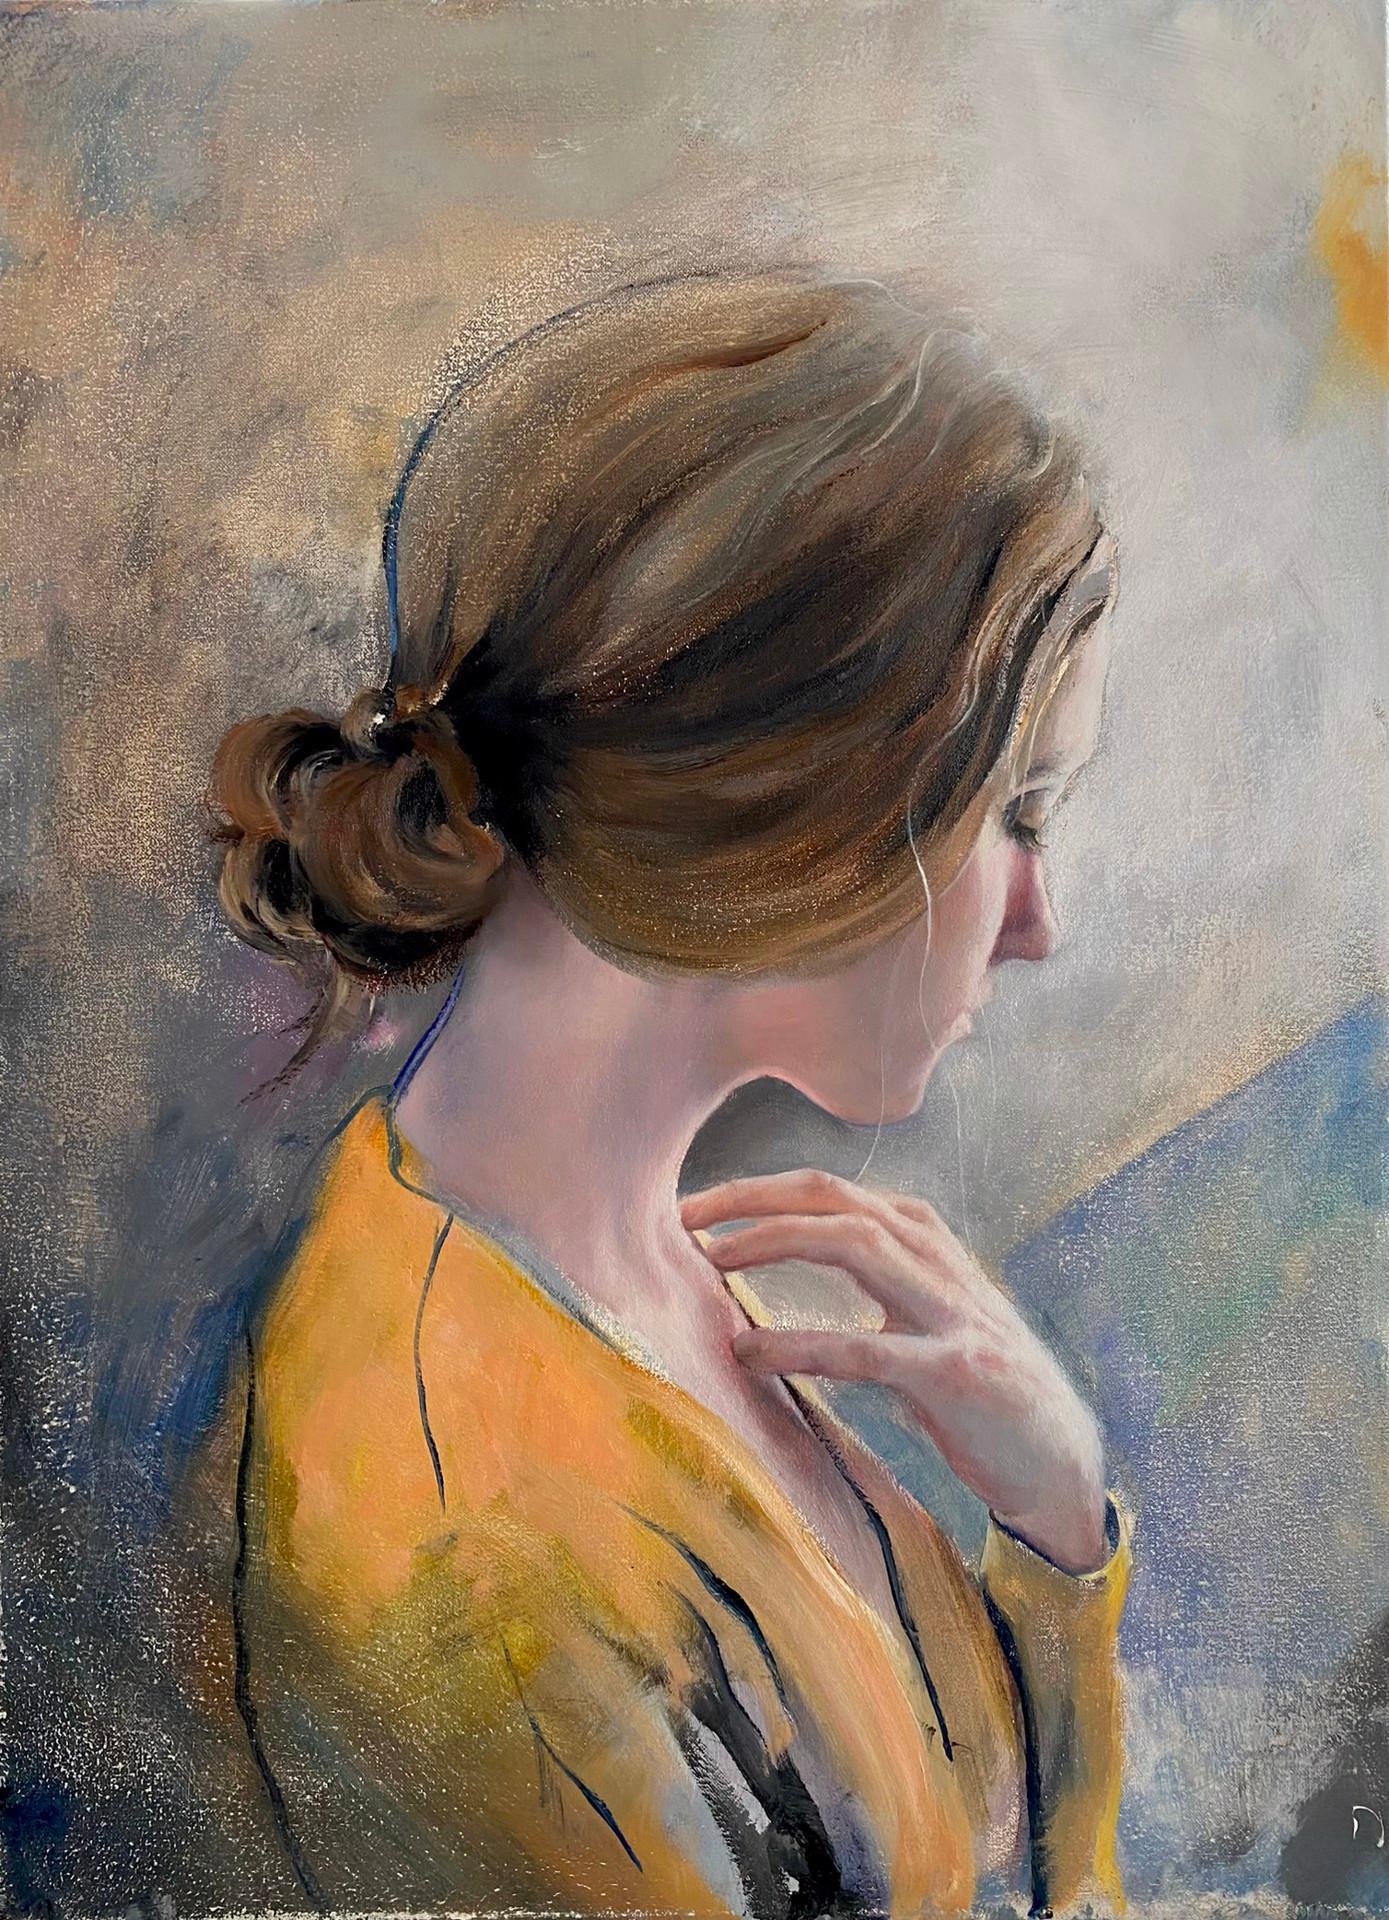 James Van Fossan’s “Patience” (2024) is a striking oil on linen portrait, measuring 19 x 14 inches. This unframed artwork, which is ready to hang, captures the serene, contemplative expression of a woman lost in thought. The artist’s use of soft,